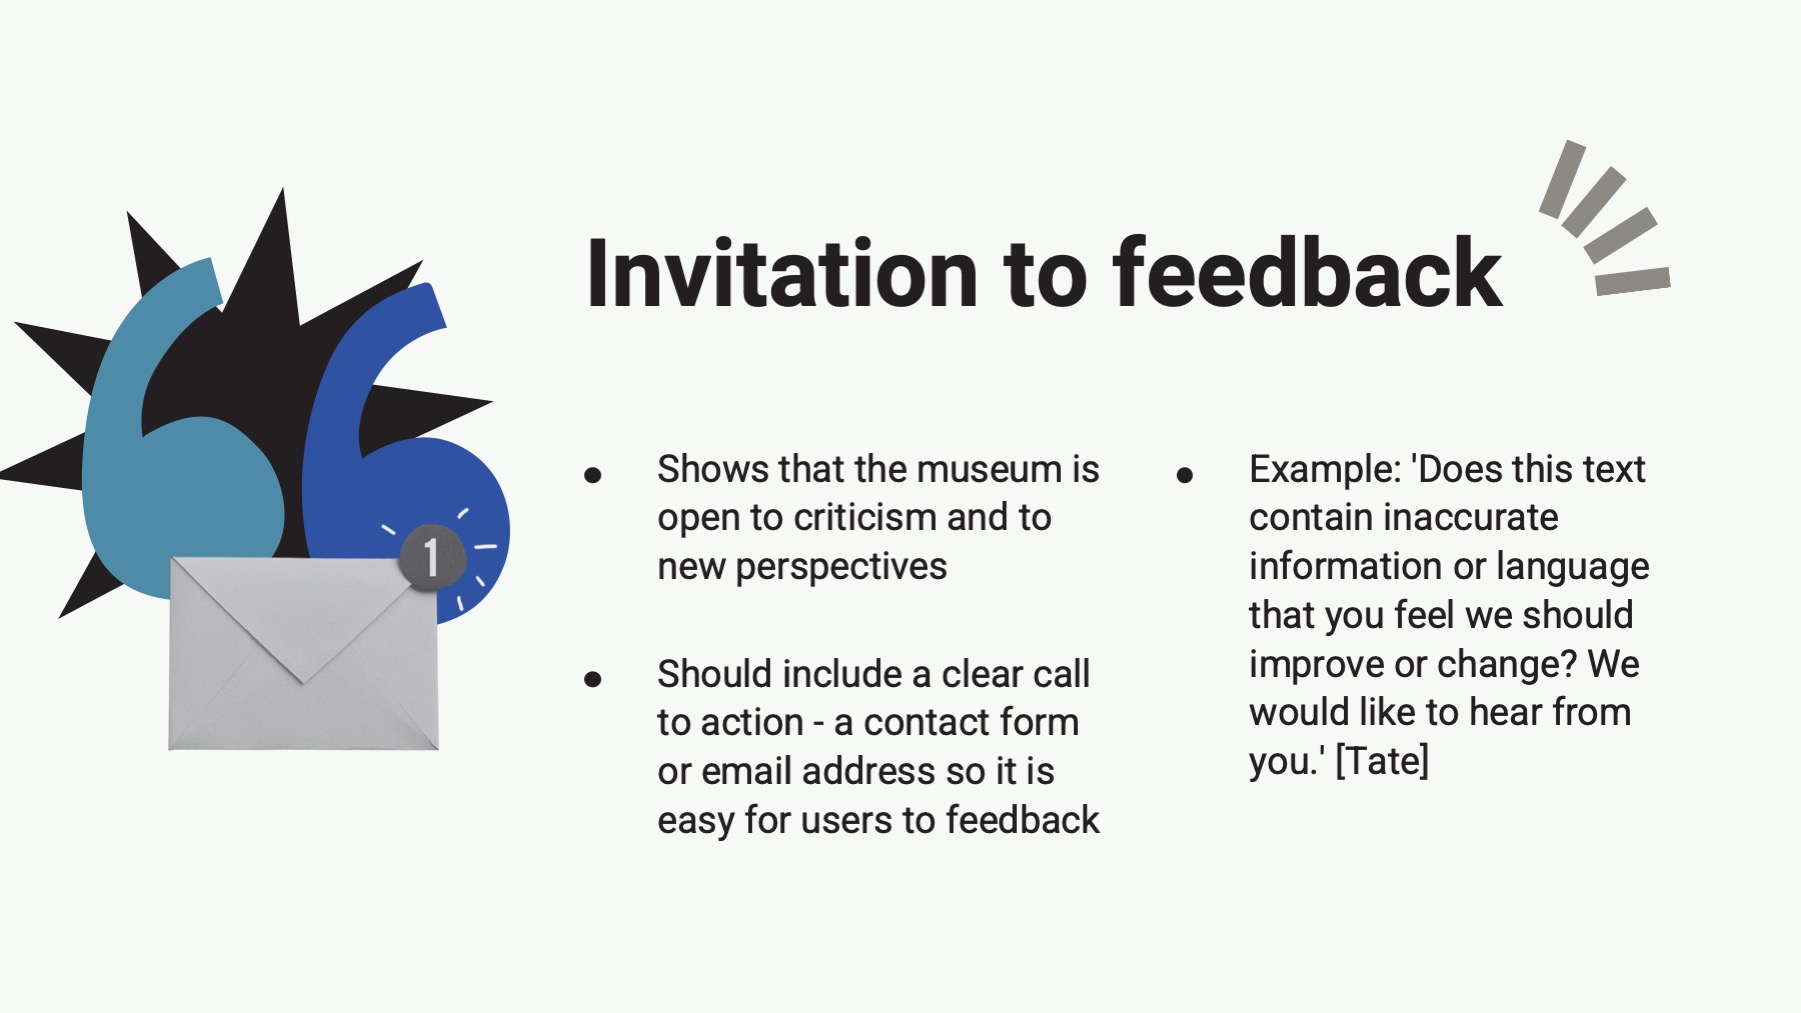 slide with the text: Invitation to feedback Shows that the museum is open to criticism and to new perspectives Should include a clear call to action - a contact form or email address so it is easy for users to feedback • Example: 'Does this text contain inaccurate information or language that you feel we should improve or change? We would like to hear from you.' [Tate]